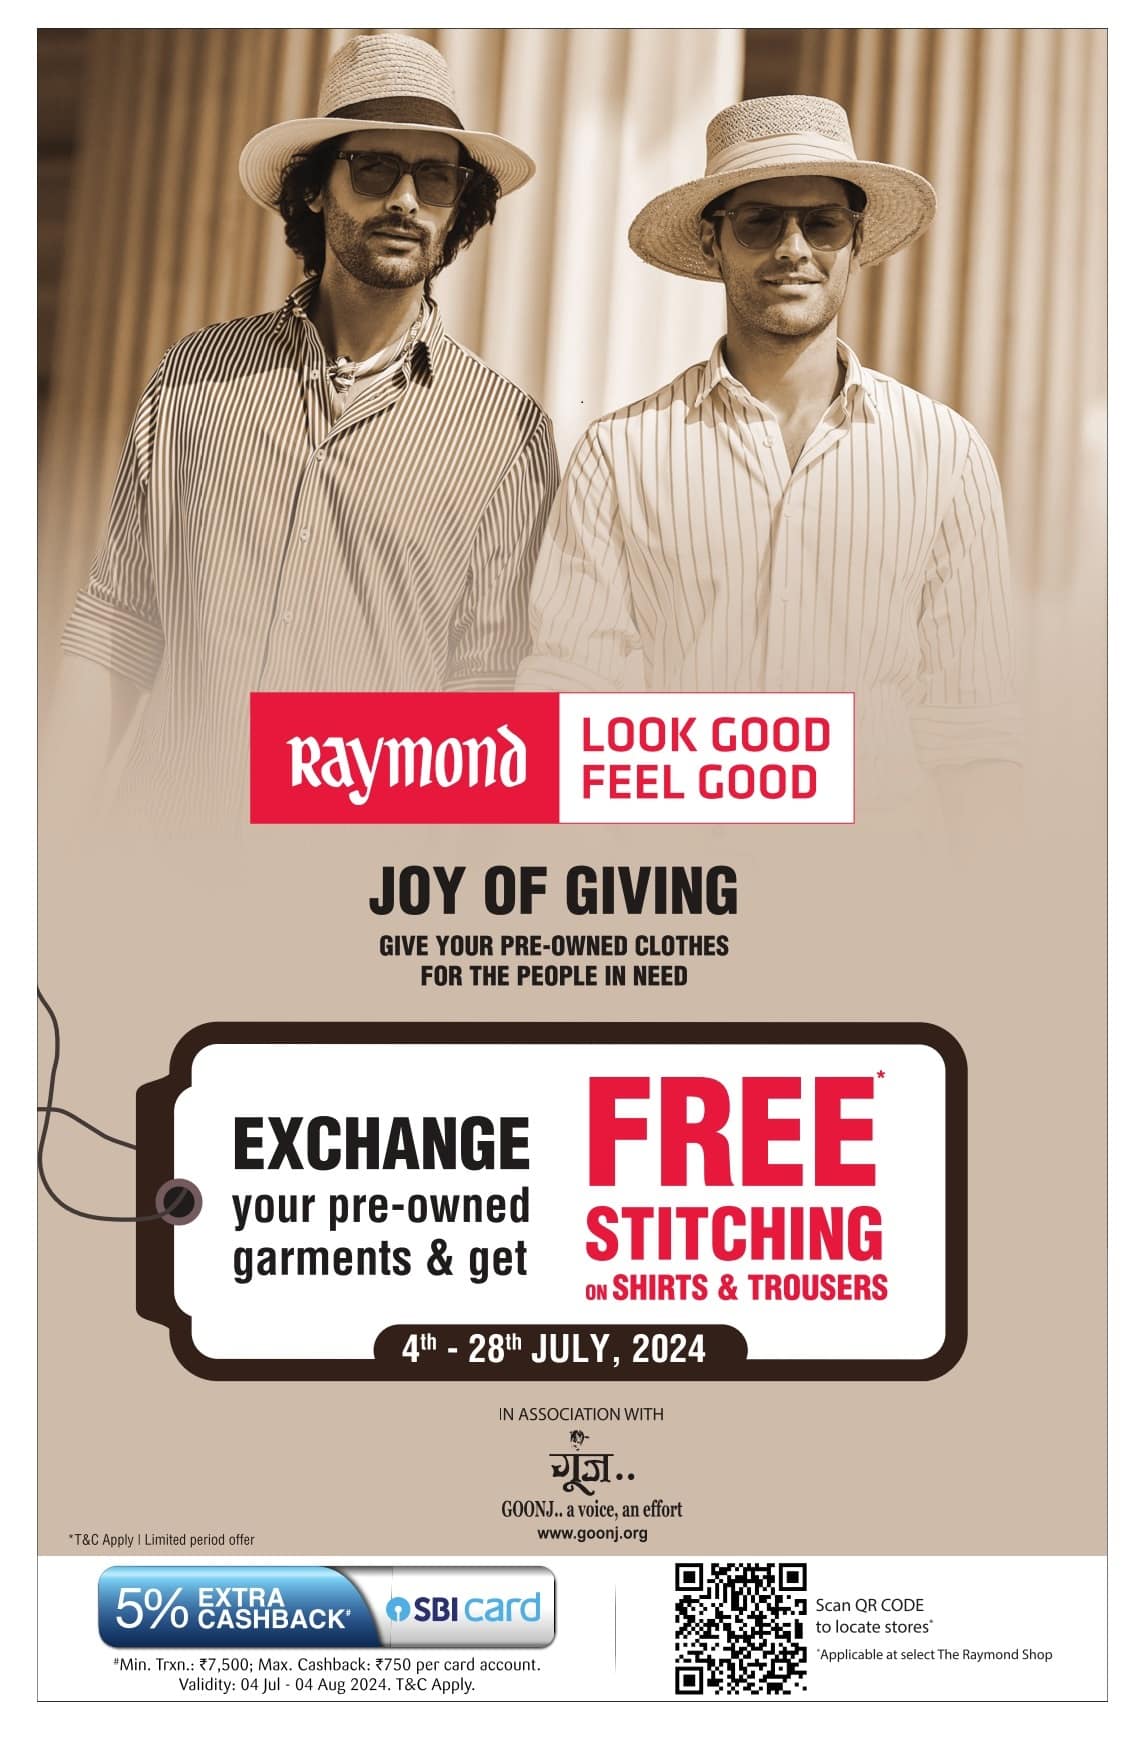 The Raymond Shop Exchange offer